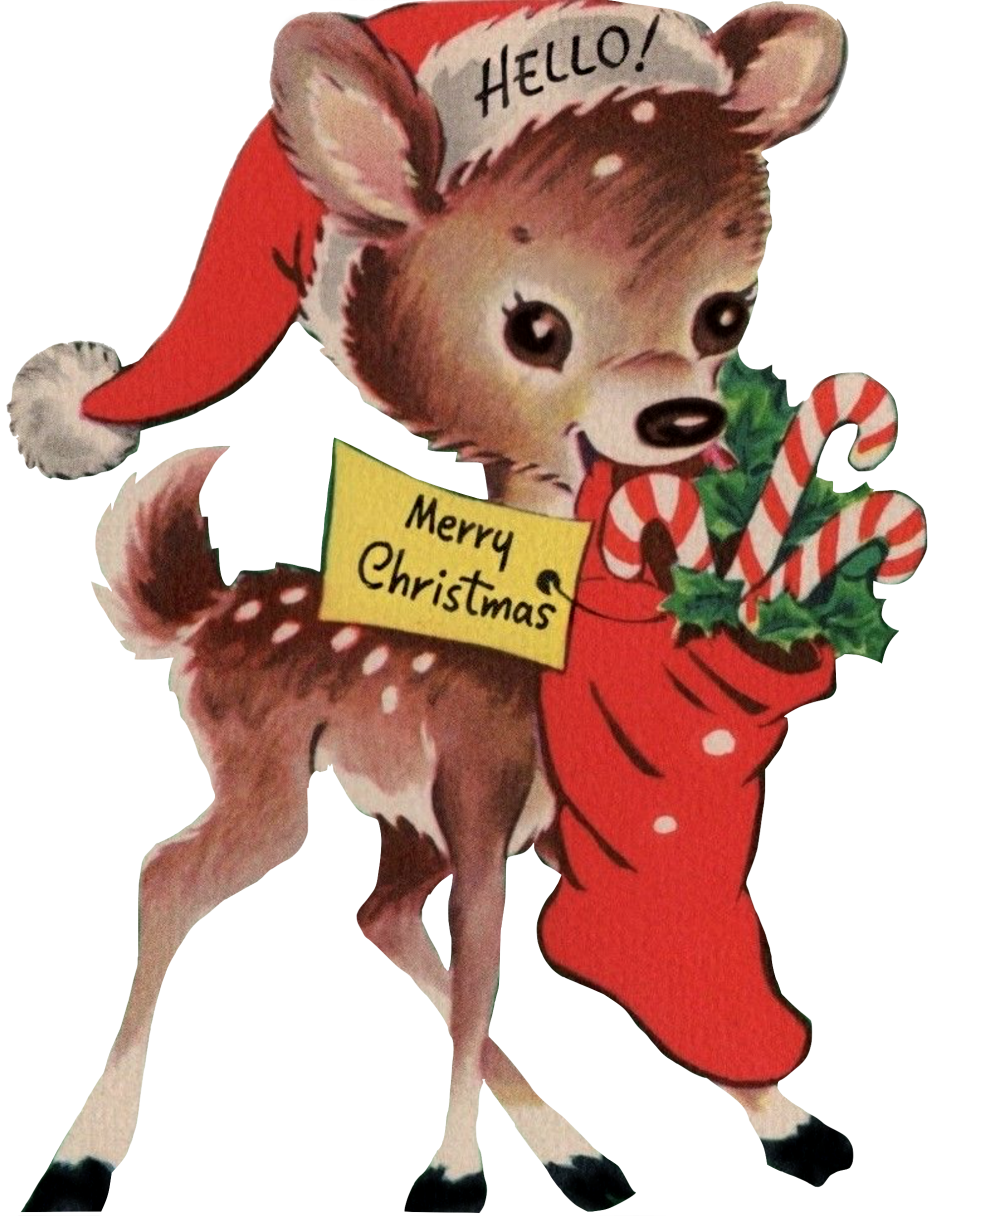 Adorable Christmas Deer with har and stocking full of candy canes